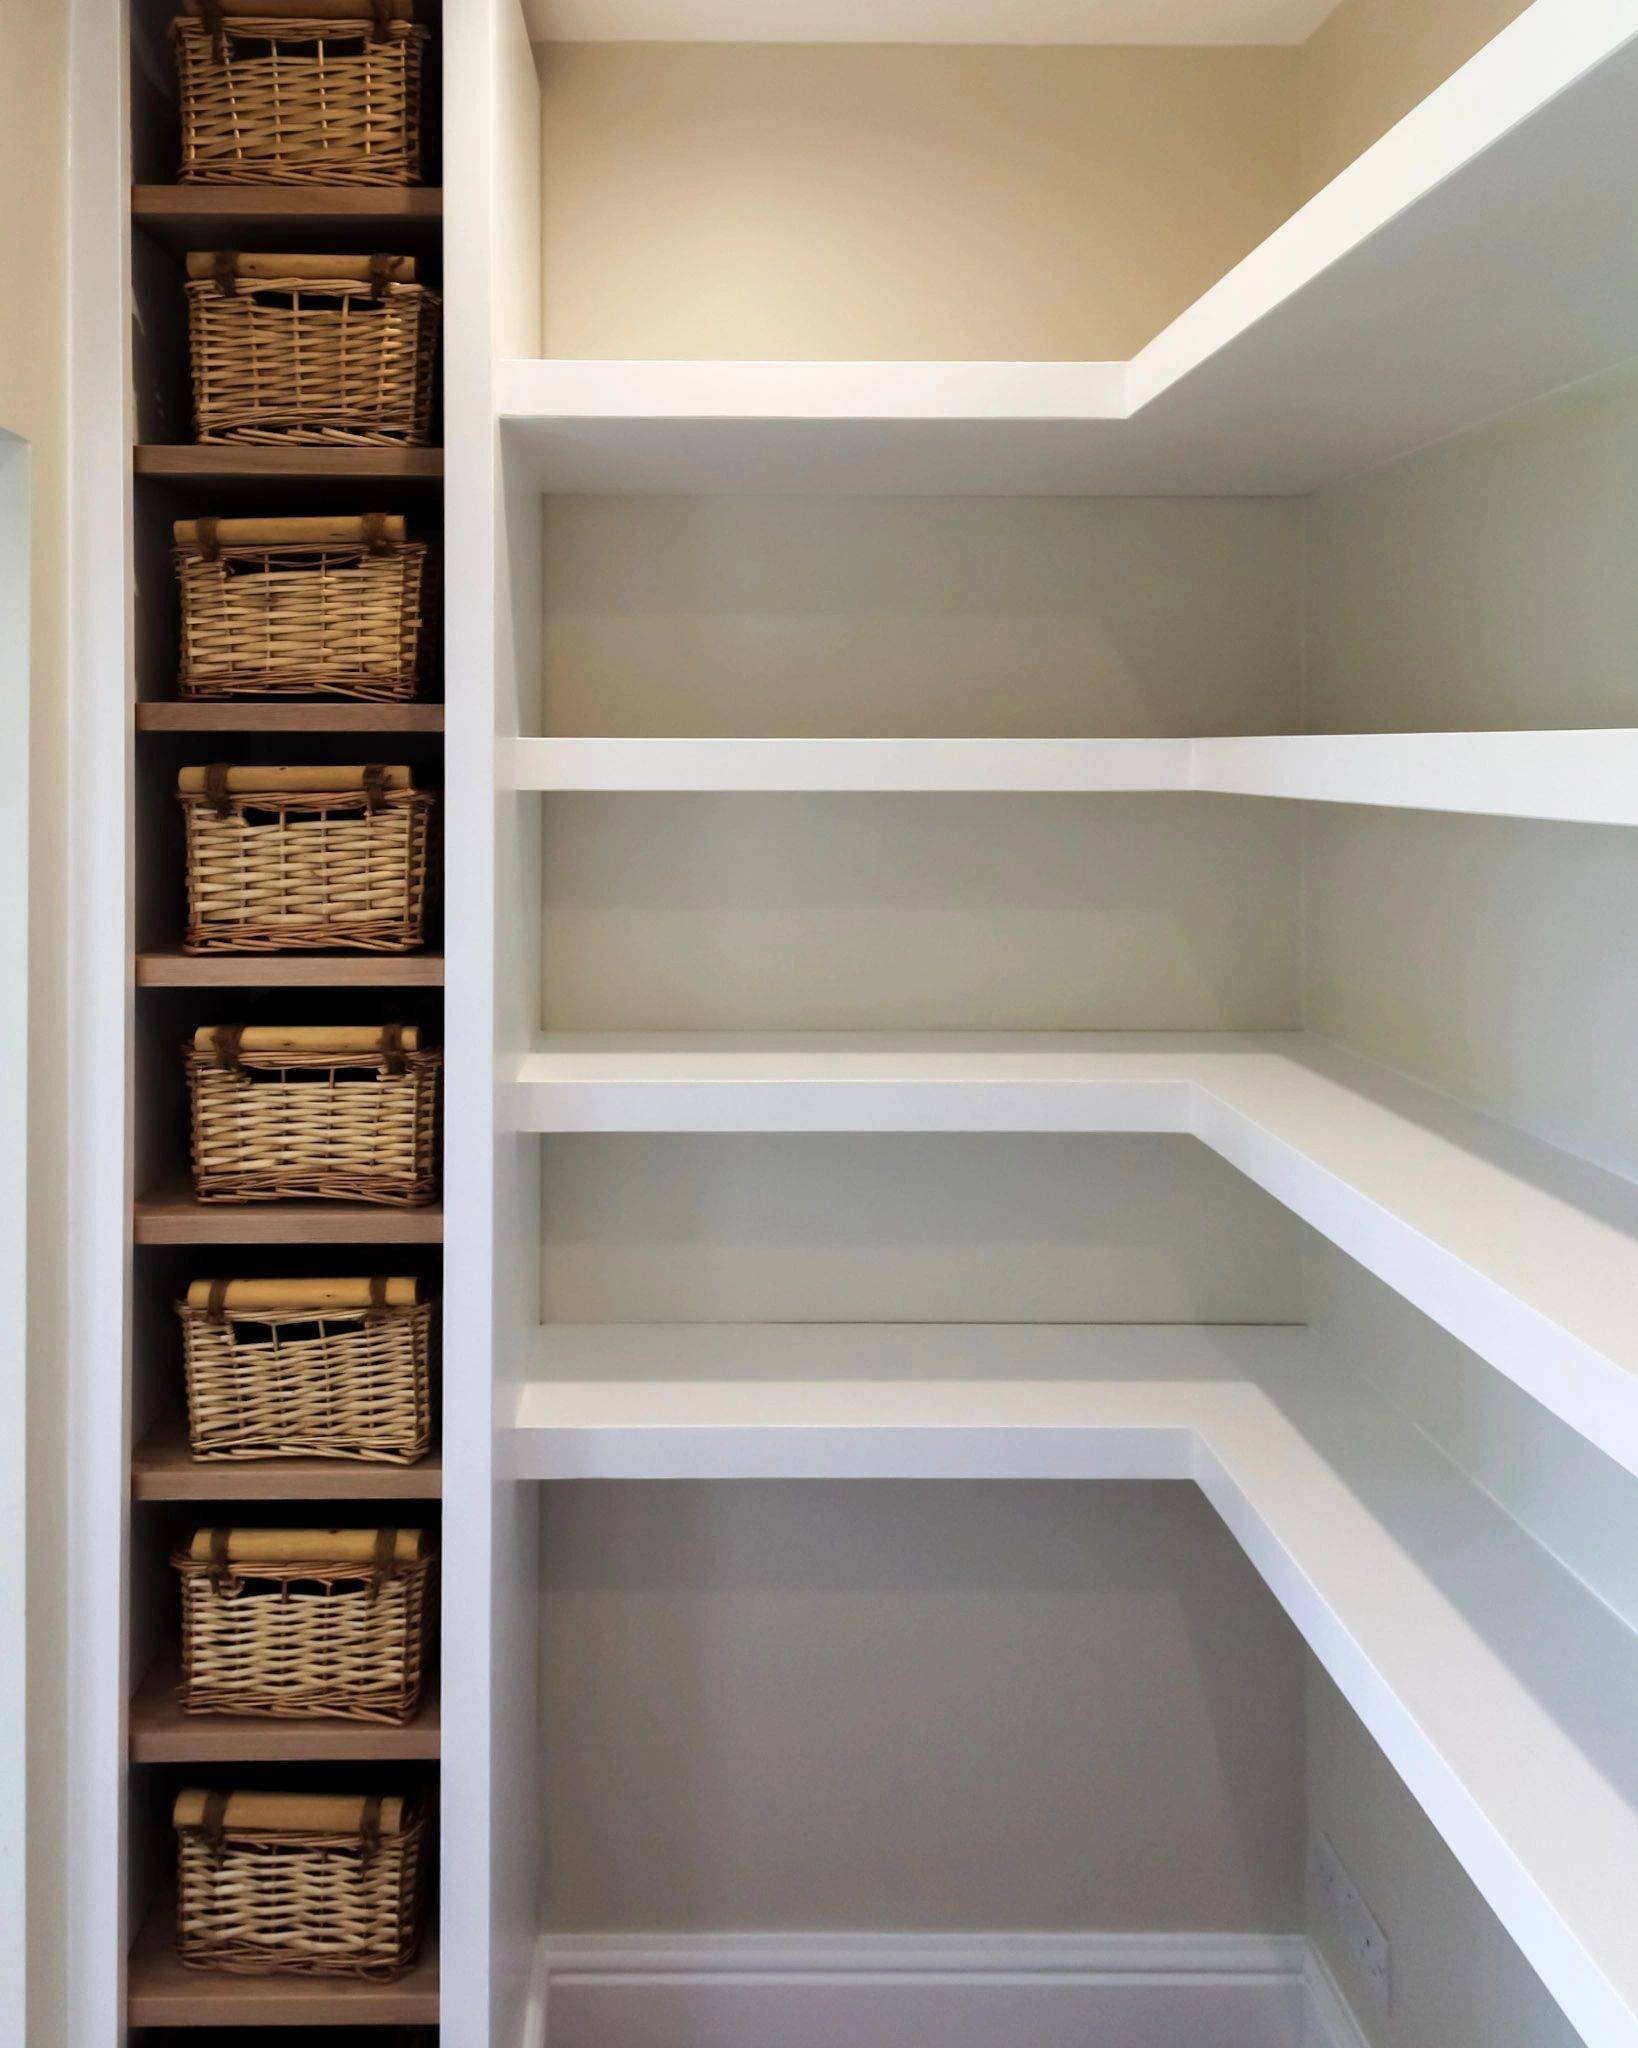 Stylish Pantry Shelving To Keep Things, What Type Of Wood To Use For Pantry Shelves